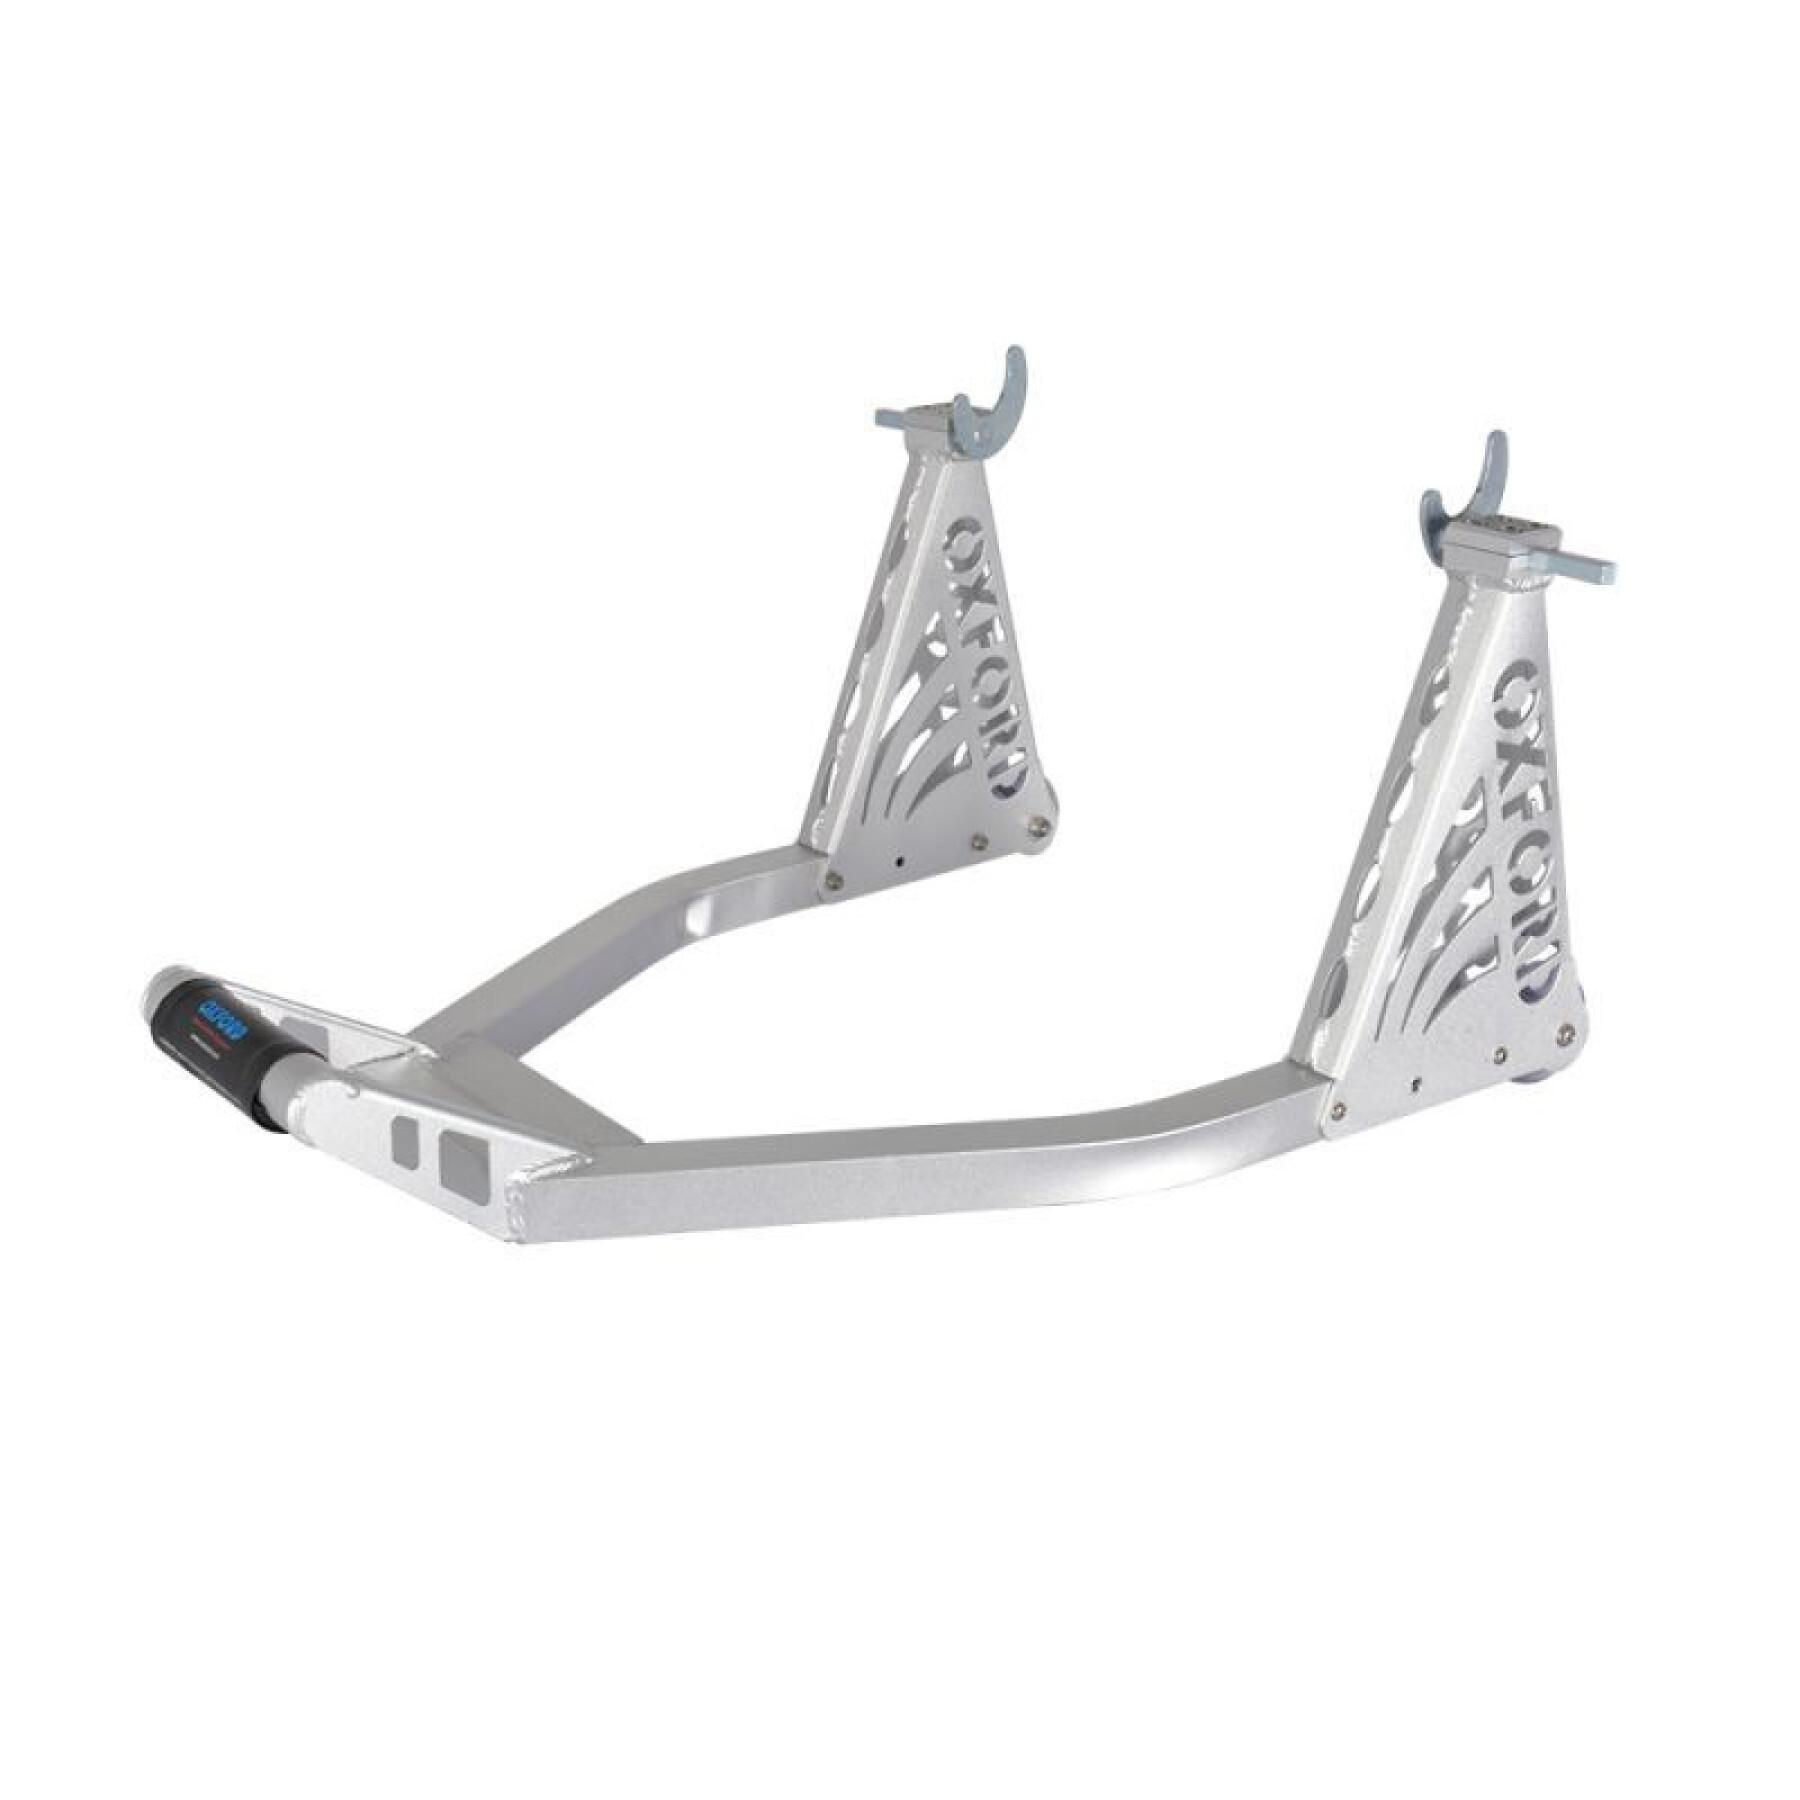 Motorcycle rear aluminum center stand Oxford